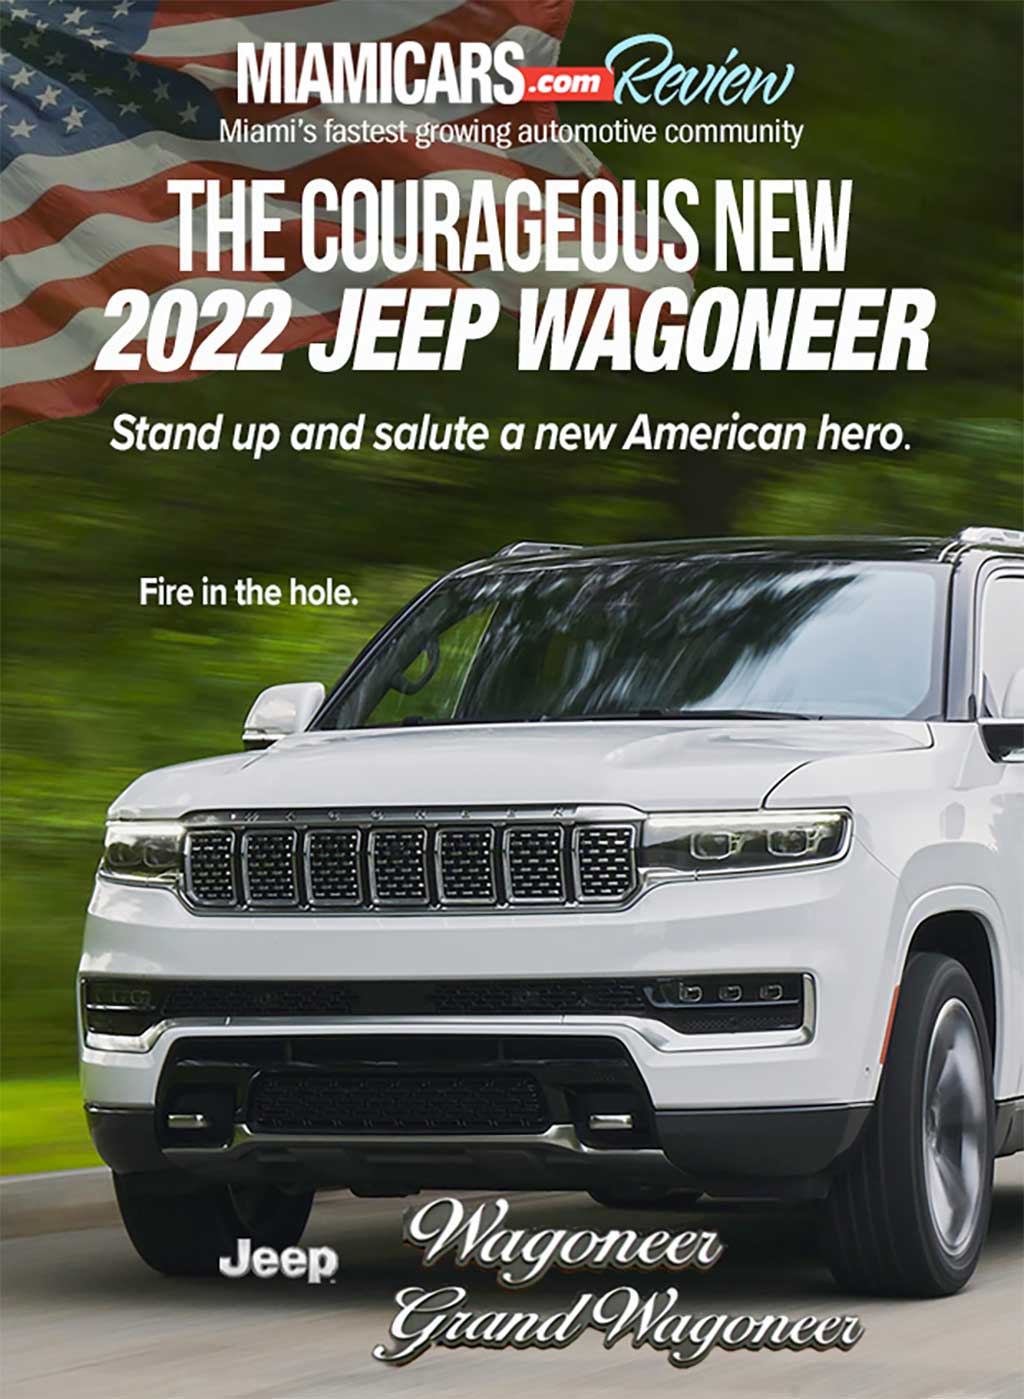 The Courageous New 2022 Jeep Wagoneer